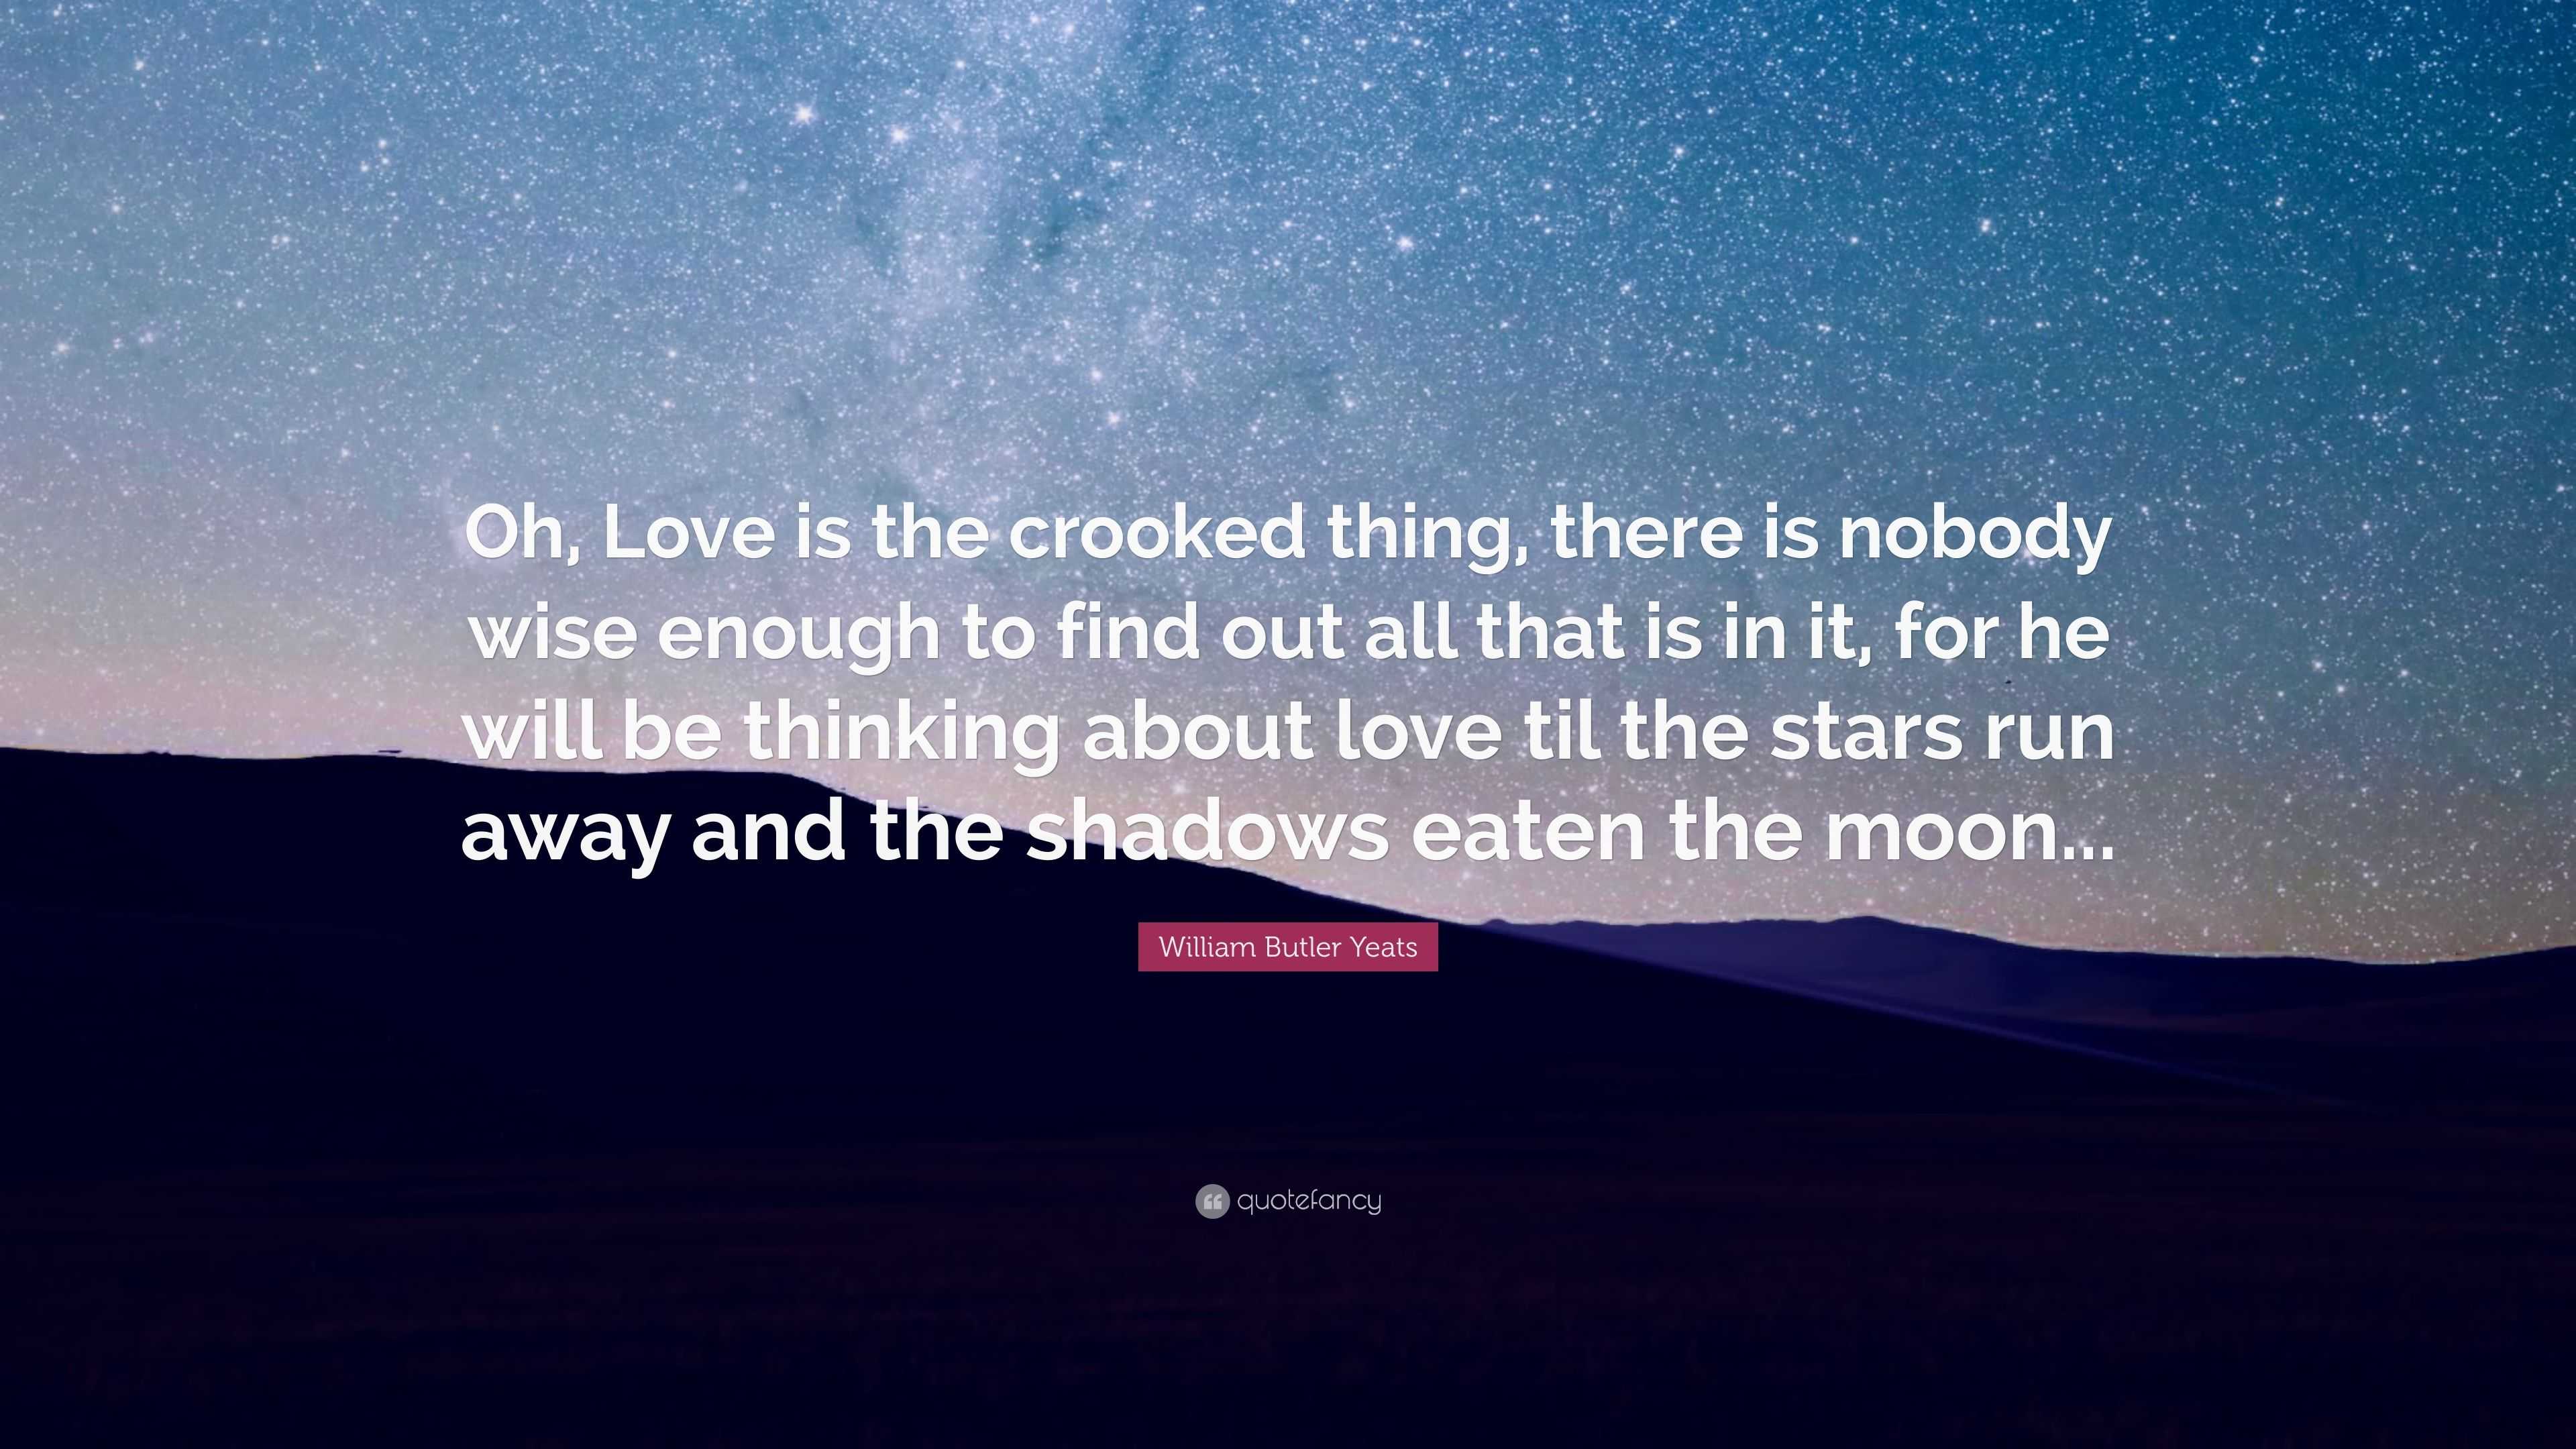 William Butler Yeats Quote “Oh, Love is the crooked thing, there is